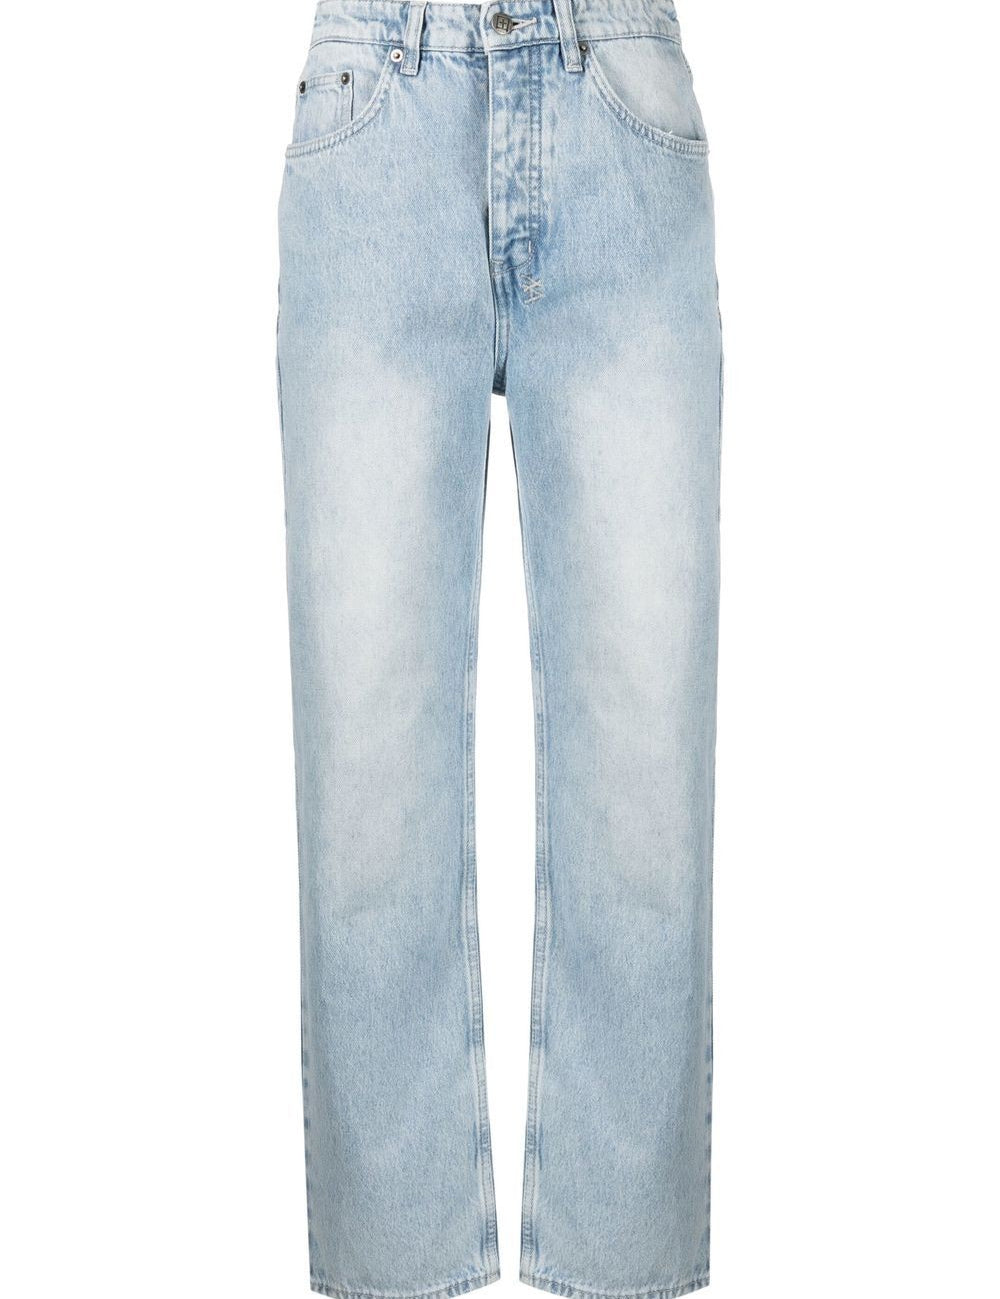 relaxed-straight-jeans.jpg